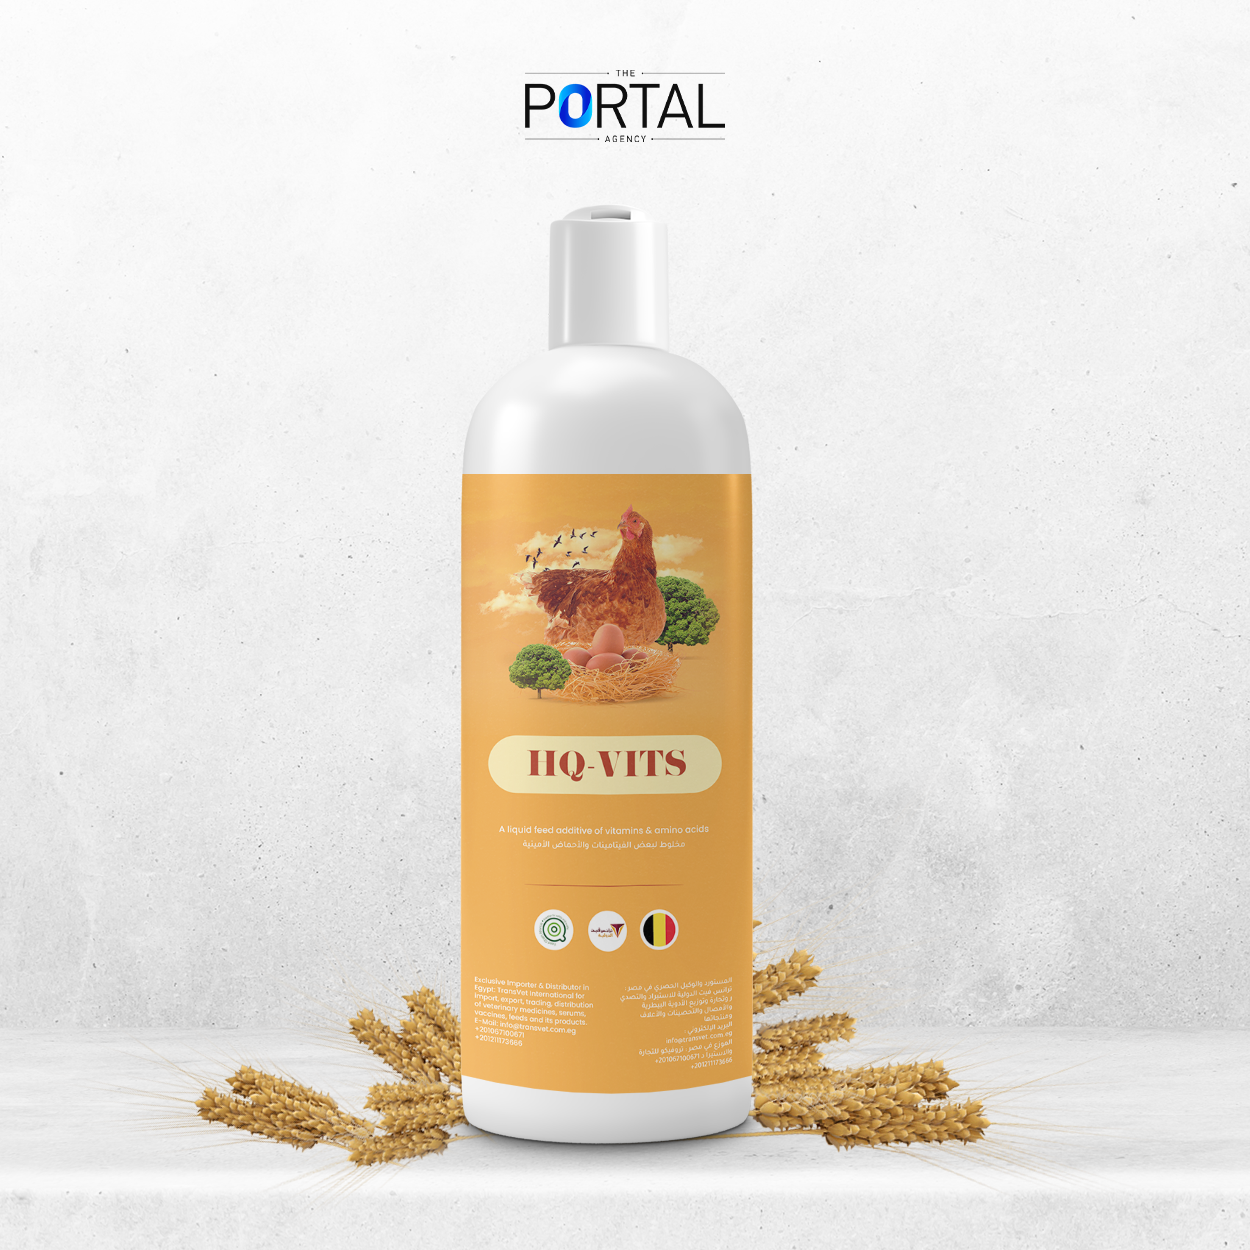 https://theportalagency.com/project/hq-vits-branding/